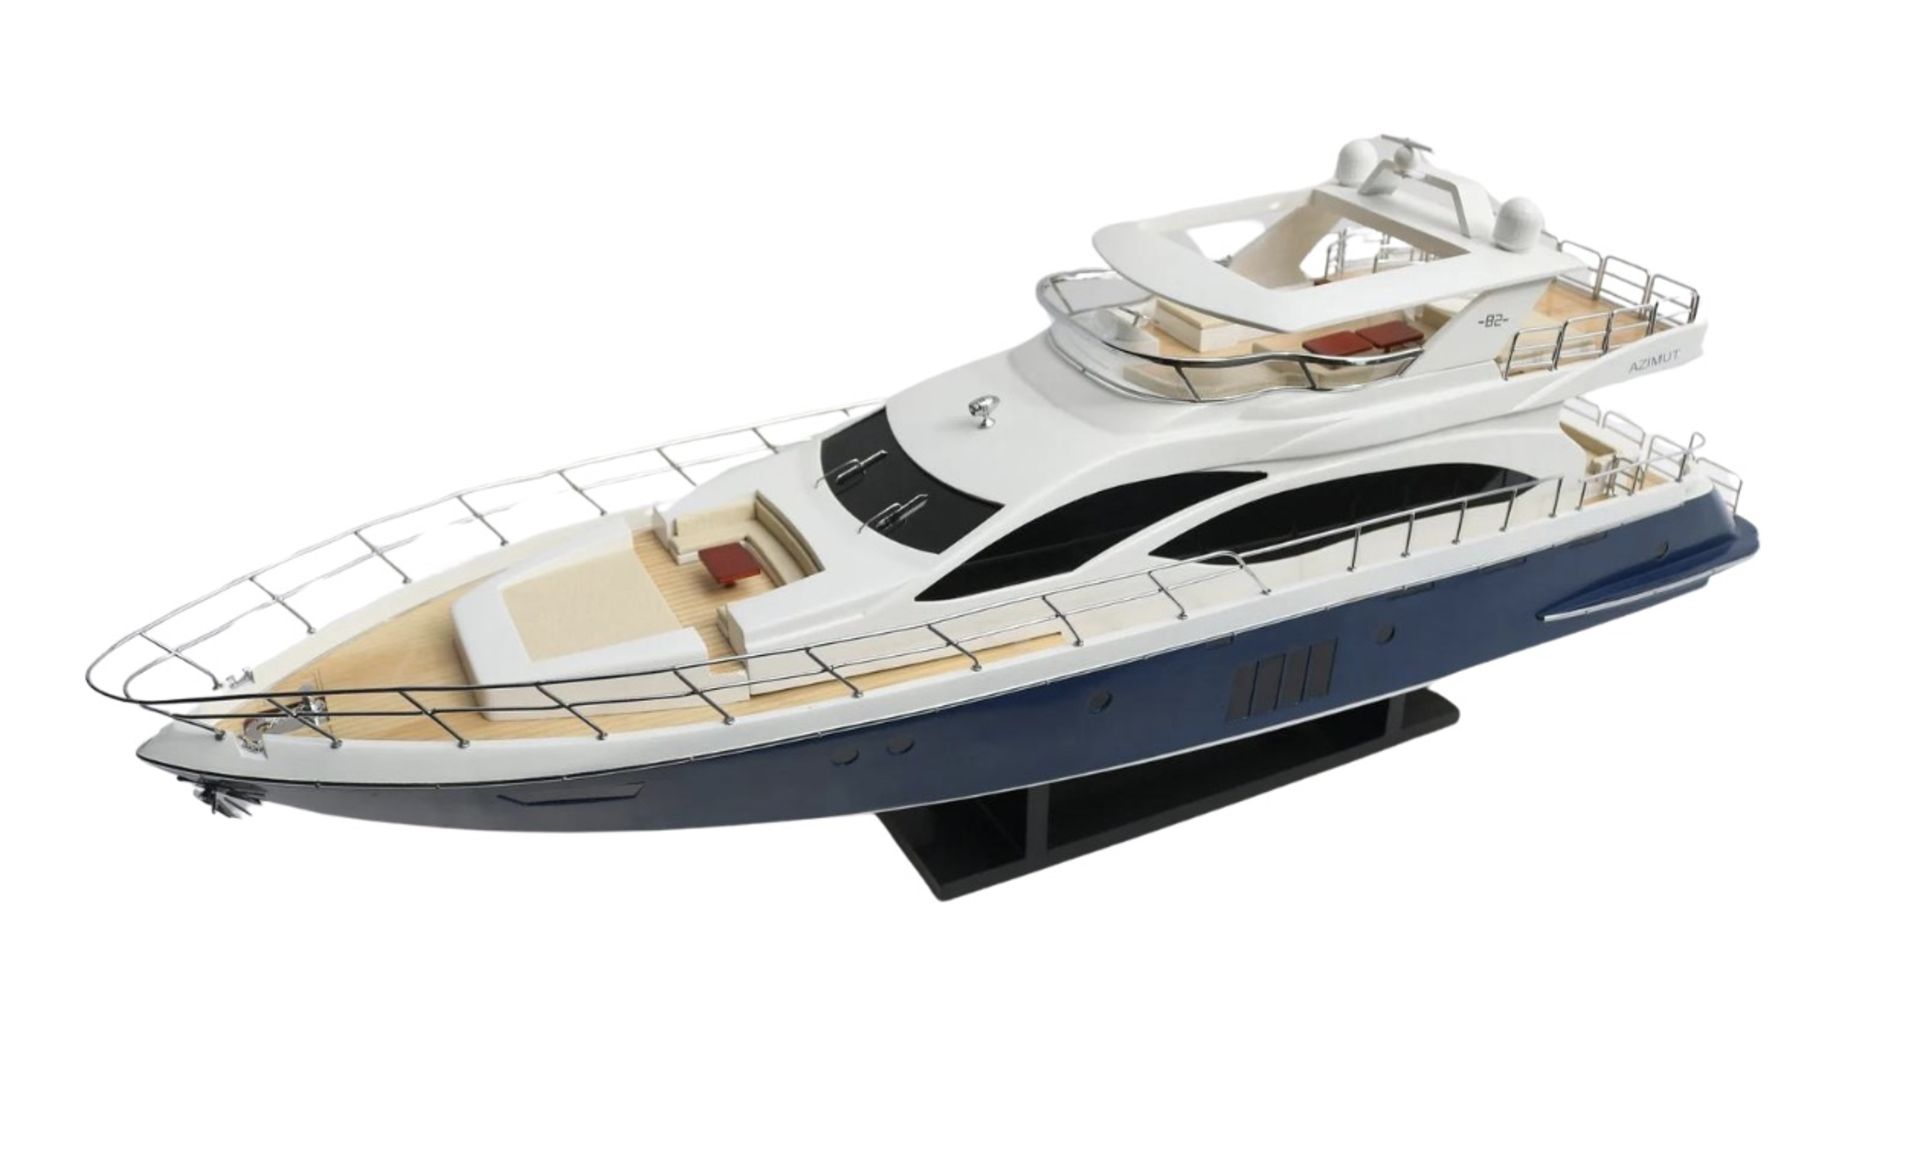 Azimut 82 Yacht Wooden Scale Desk Display Model - Image 2 of 10